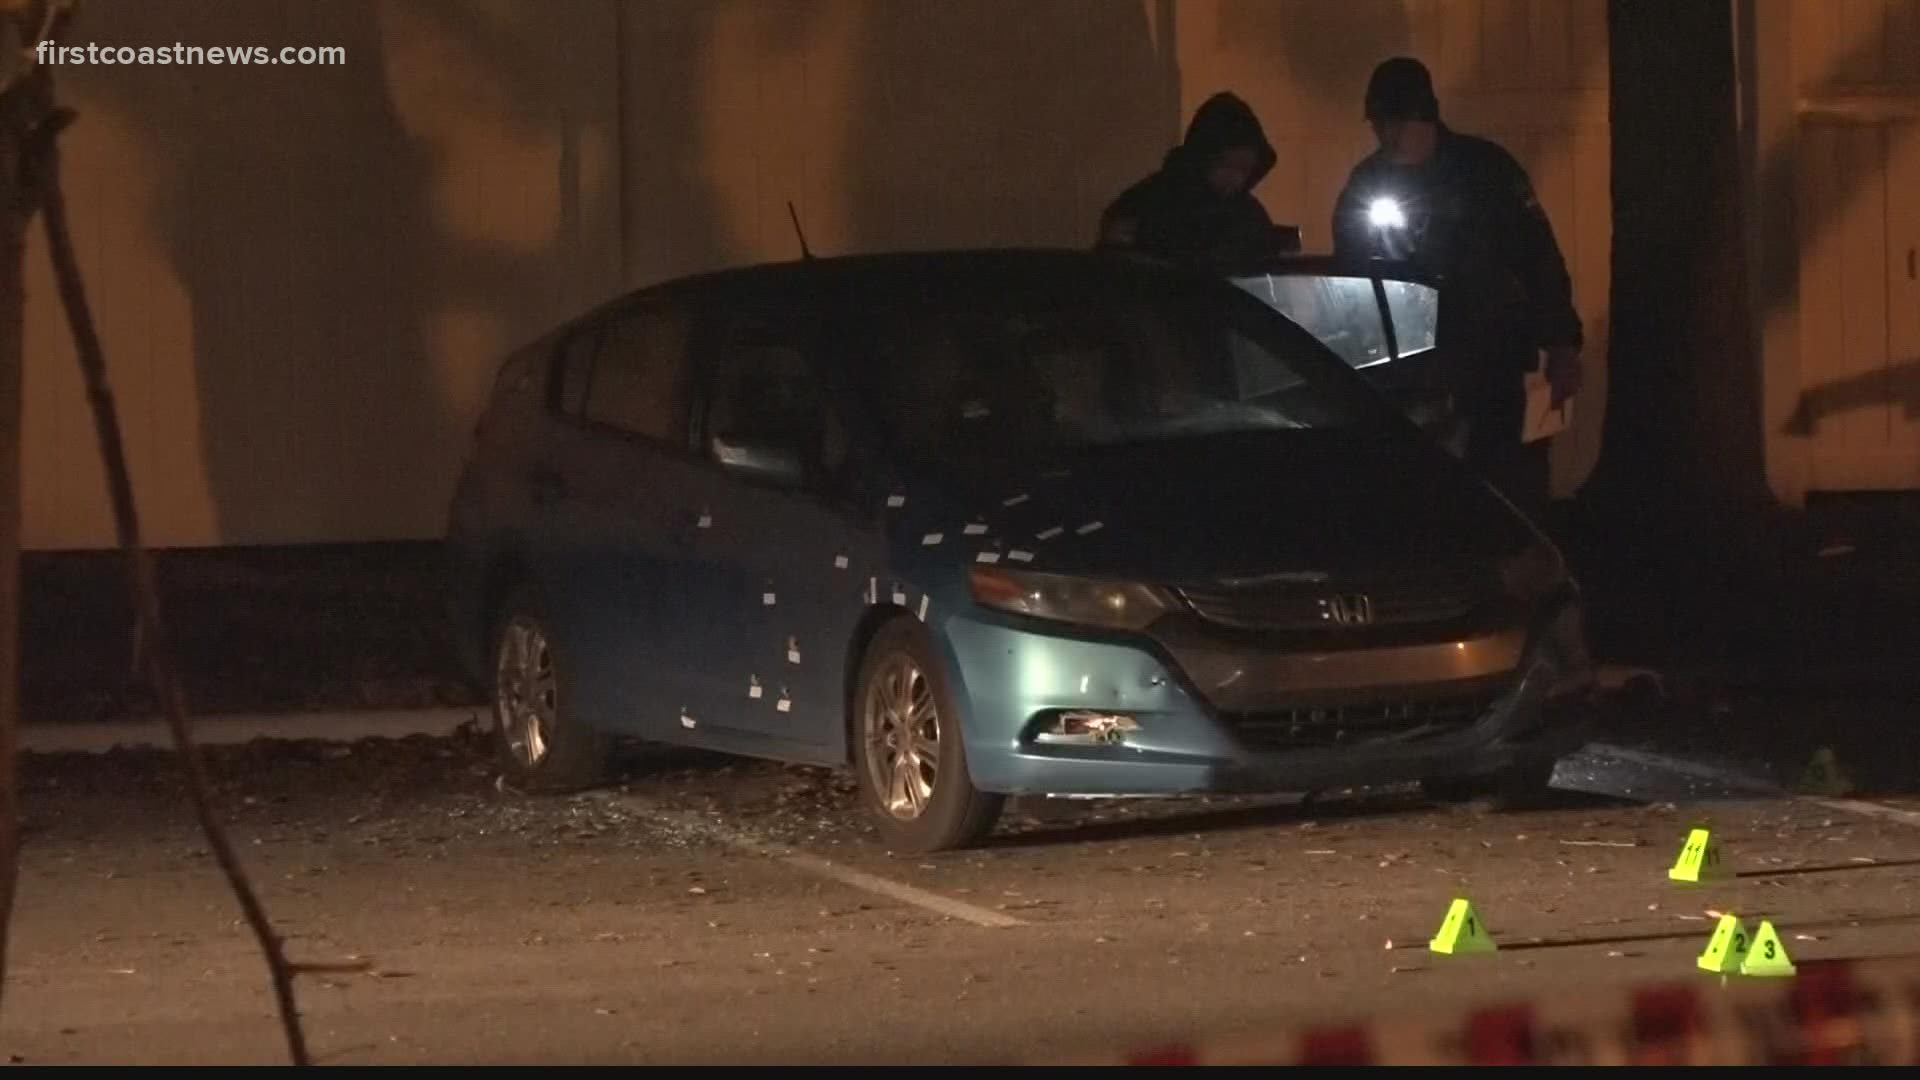 The victim, a 19-year-old woman, told police she was sitting in her parked car possibly with a friend when a gunman fired a dozen rounds at the car.